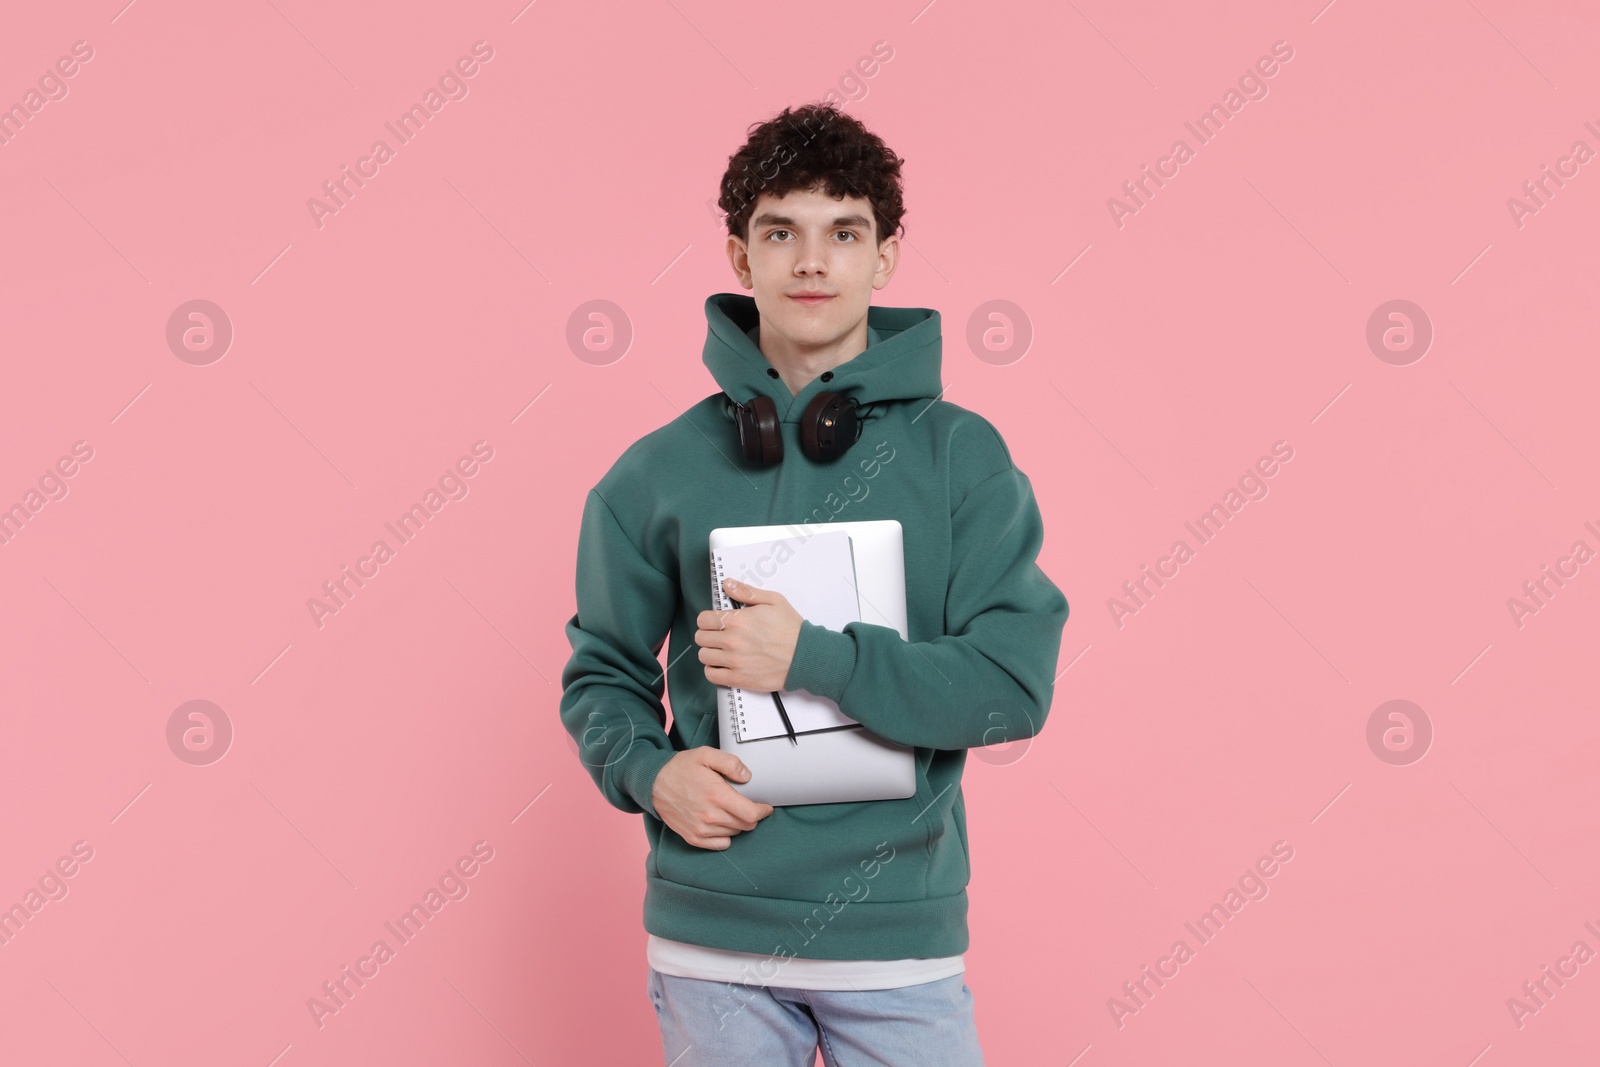 Photo of Portrait of student with laptop, notebook and headphones on pink background